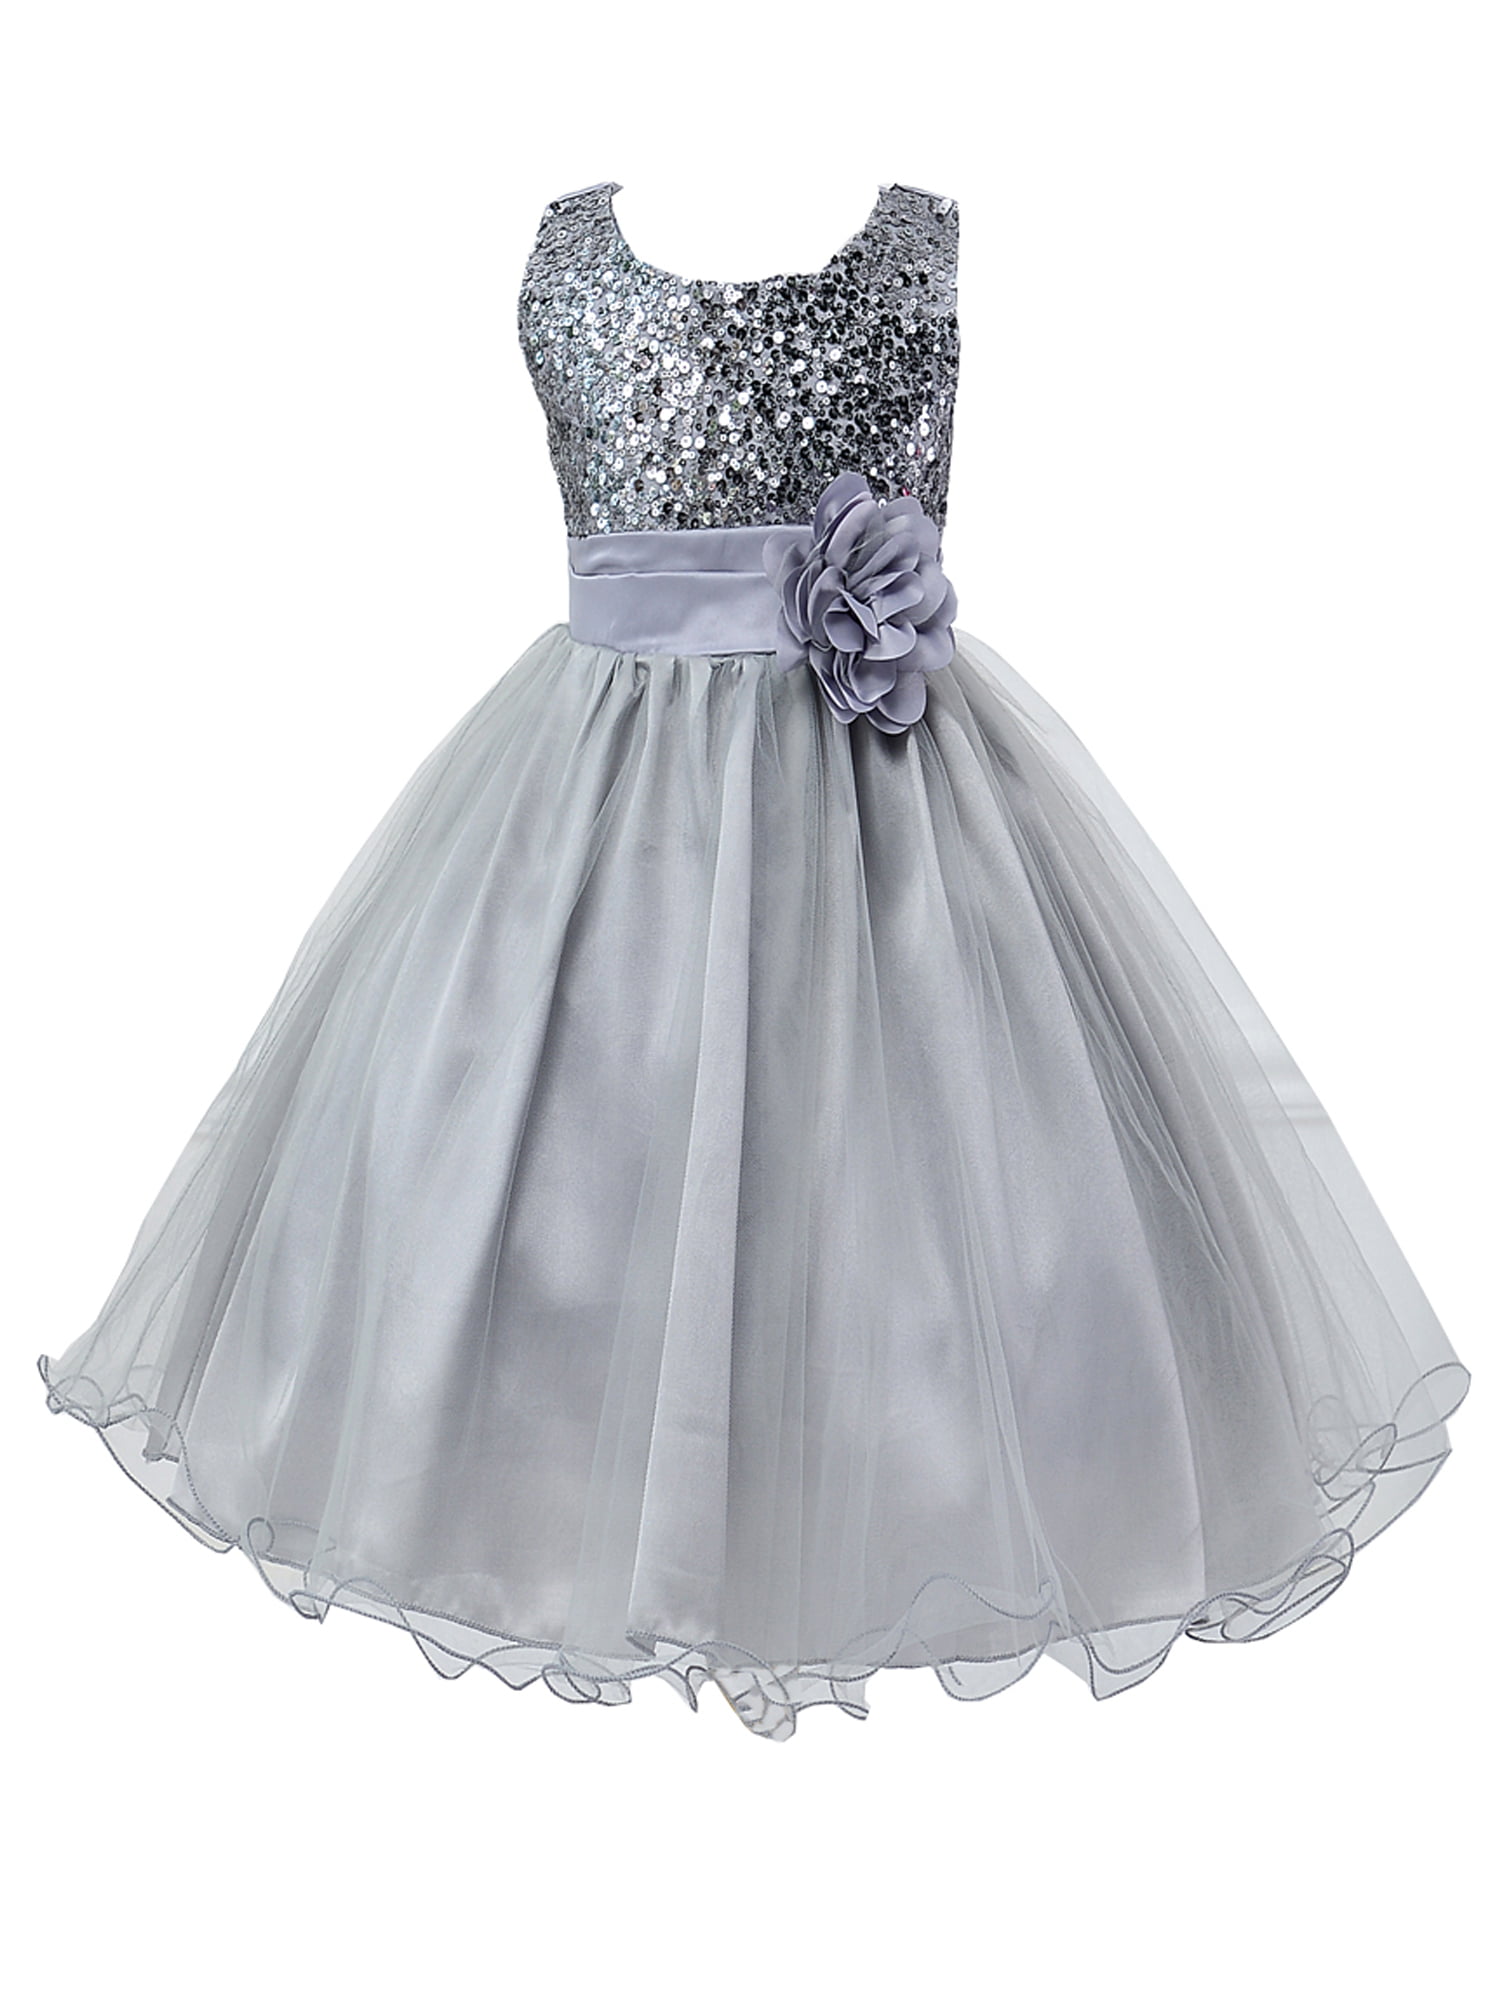 Lace Baby Princess Bridesmaid Flower Girl Dresses Pageant Wedding Party Gown 